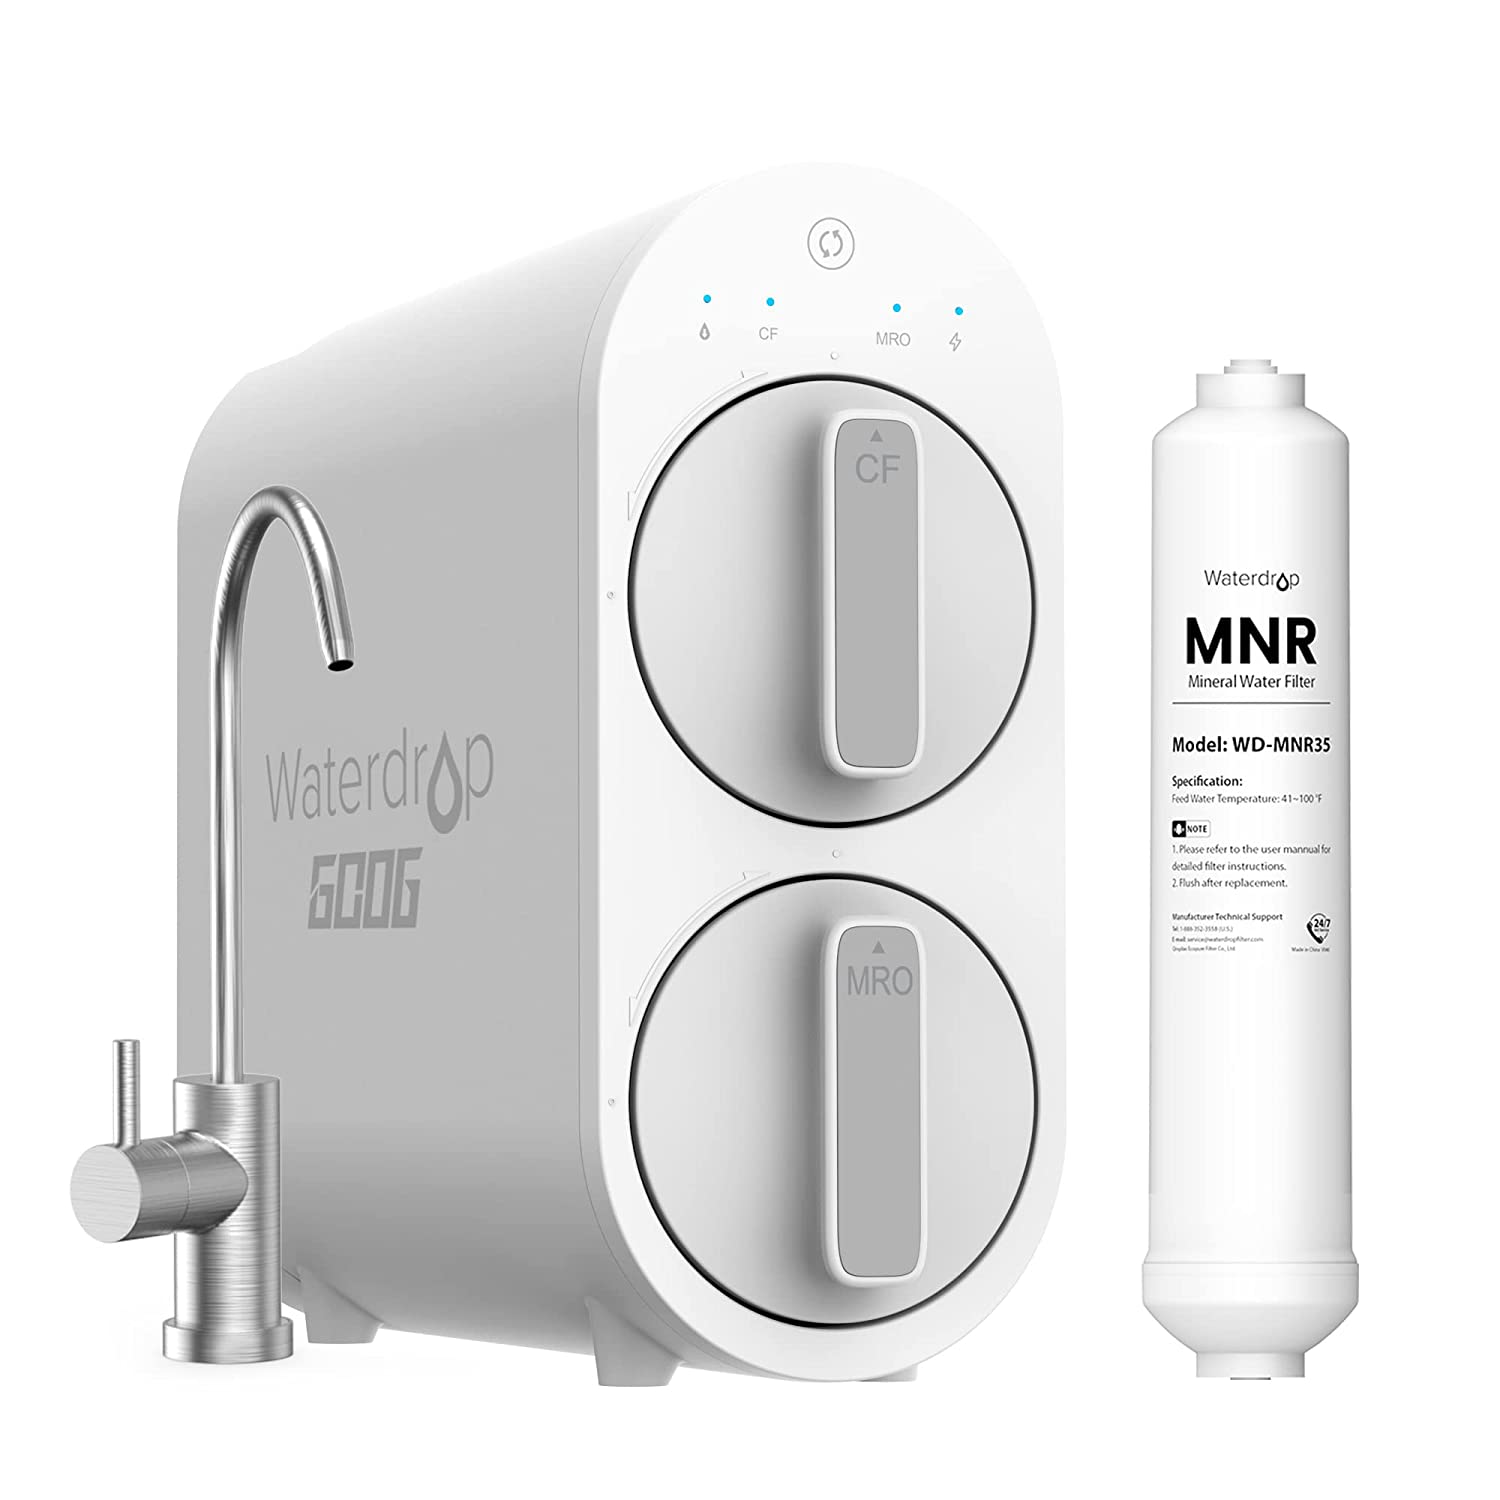 Waterdrop G2P600 Remineralization RO Water Filtration System for Home